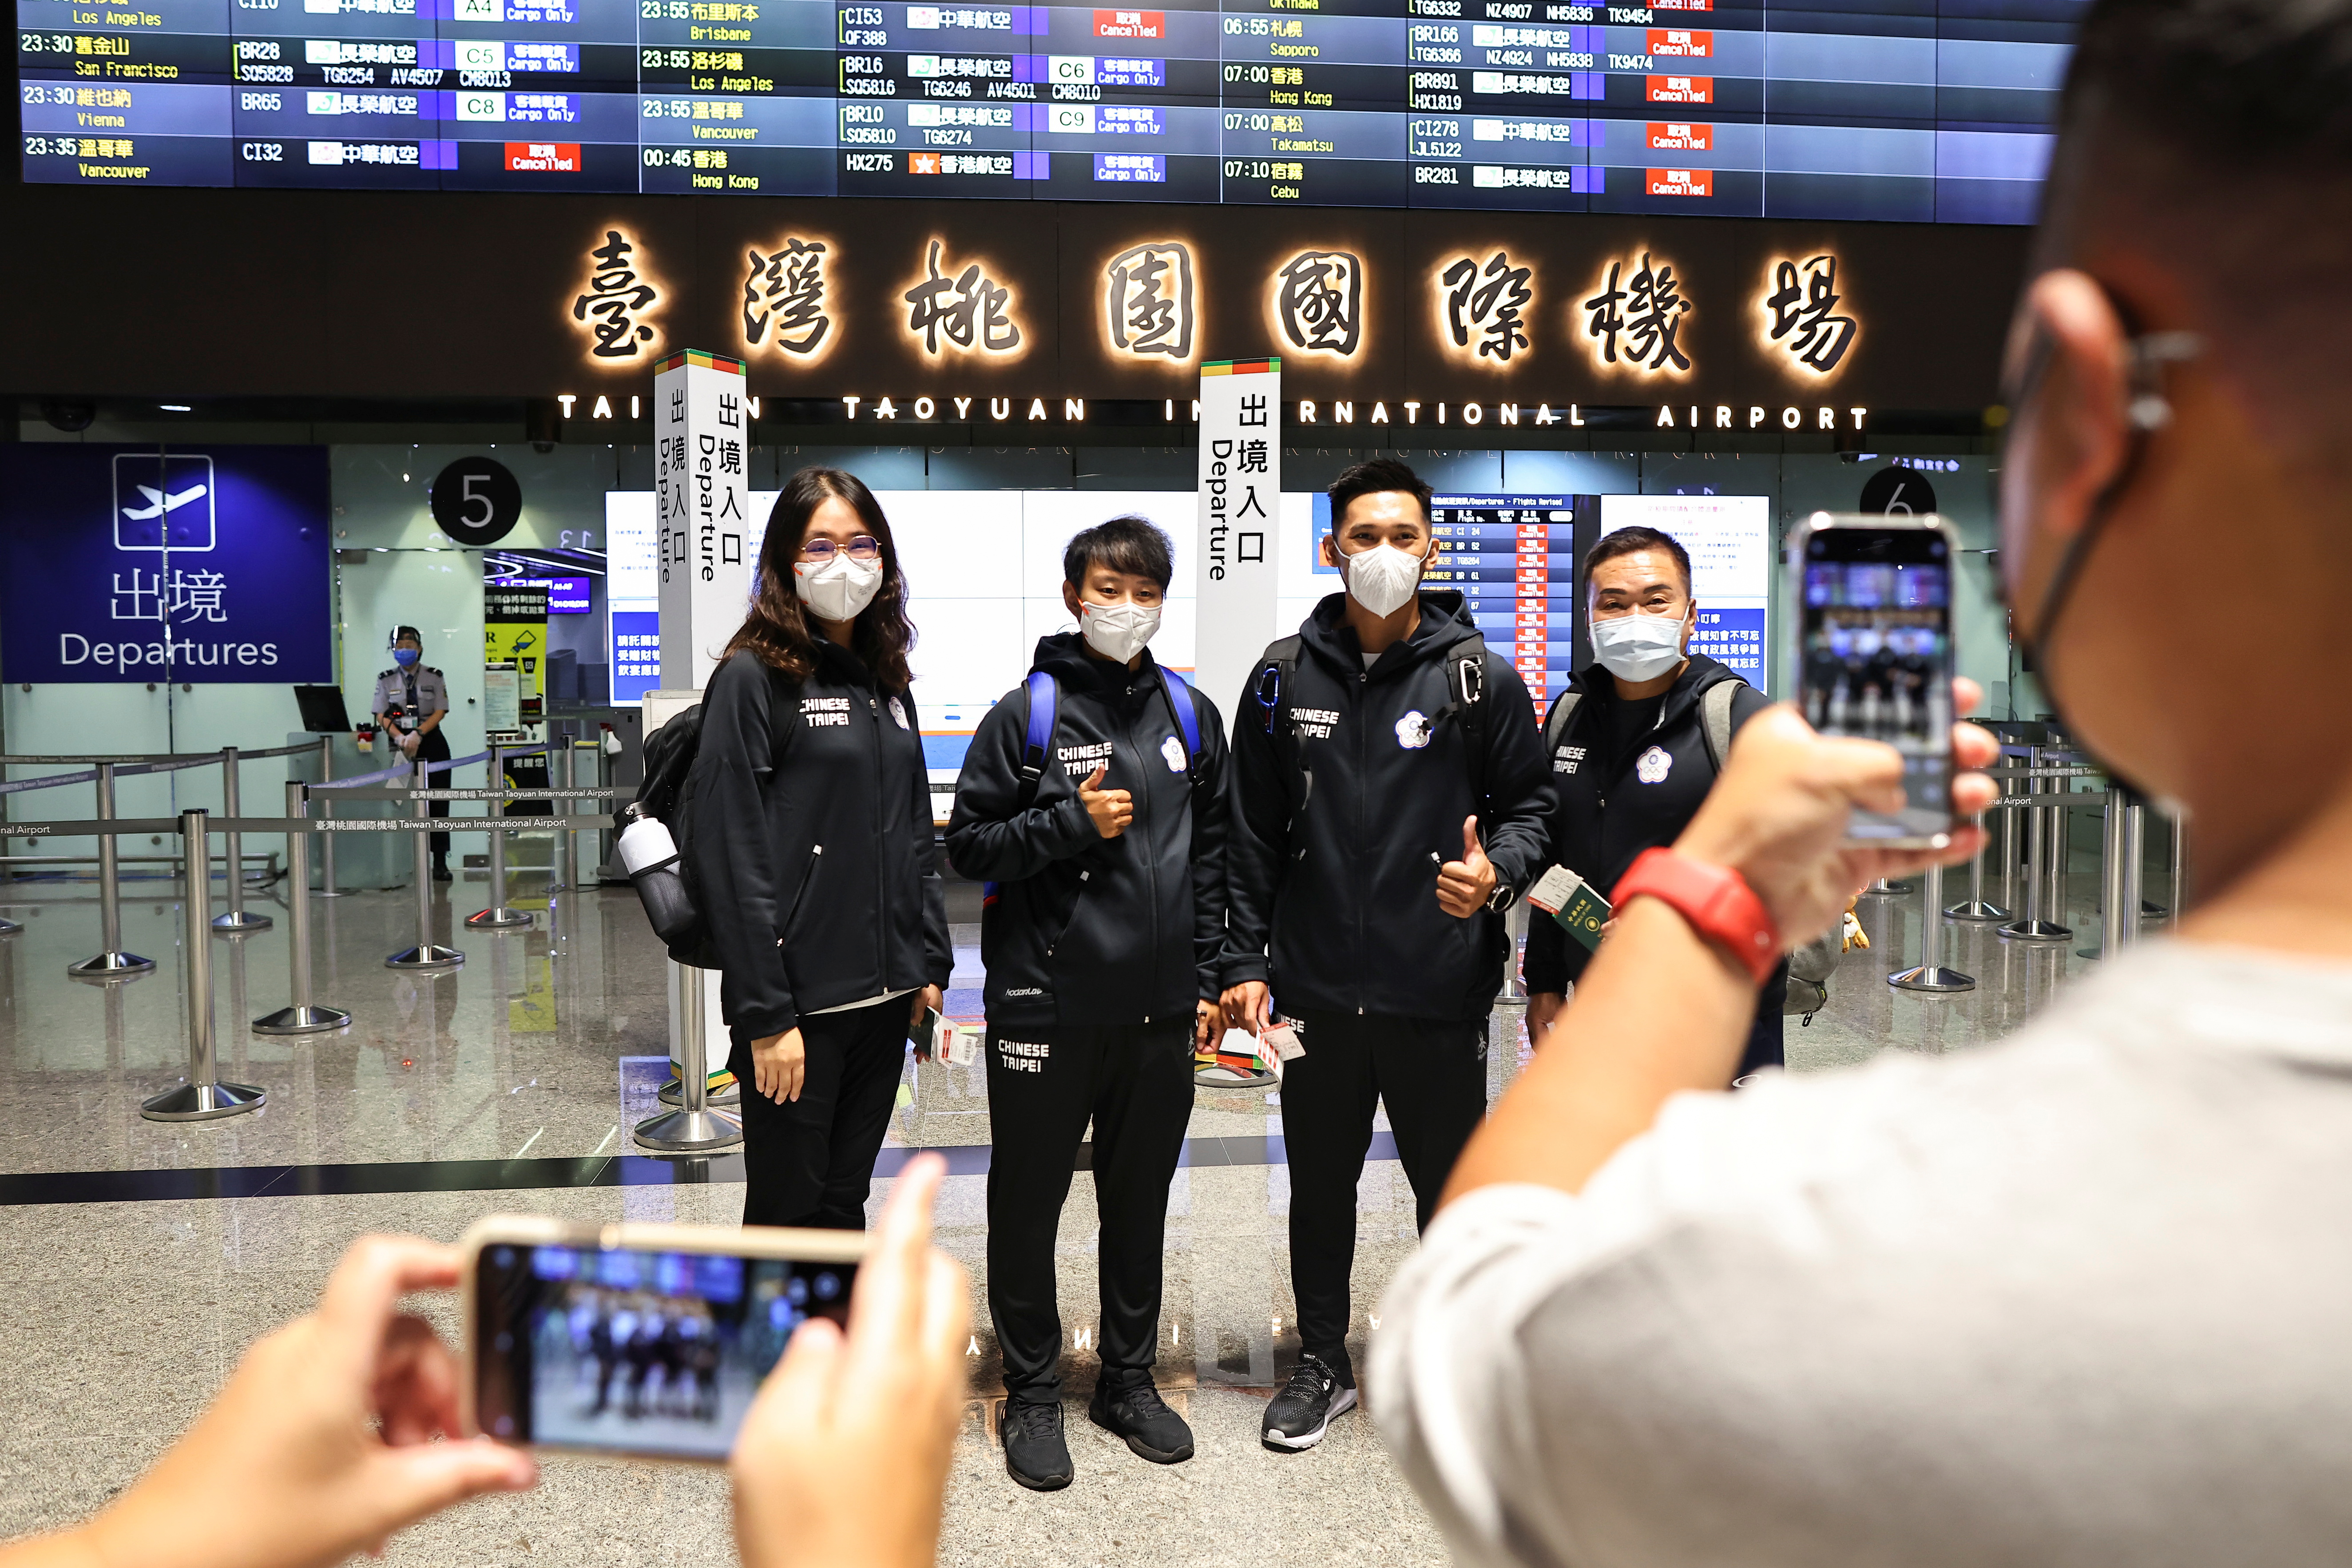 Li Sin-rong, 23, a Taiwanese luger, poses for group photos with her teammates at the airport before travelling abroad for training and competitions to qualify for the 2022 Beijing Winter Olympic Games, in Taoyuan, Taiwan October 14, 2021. Picture taken October 14, 2021. REUTERS/Ann Wang